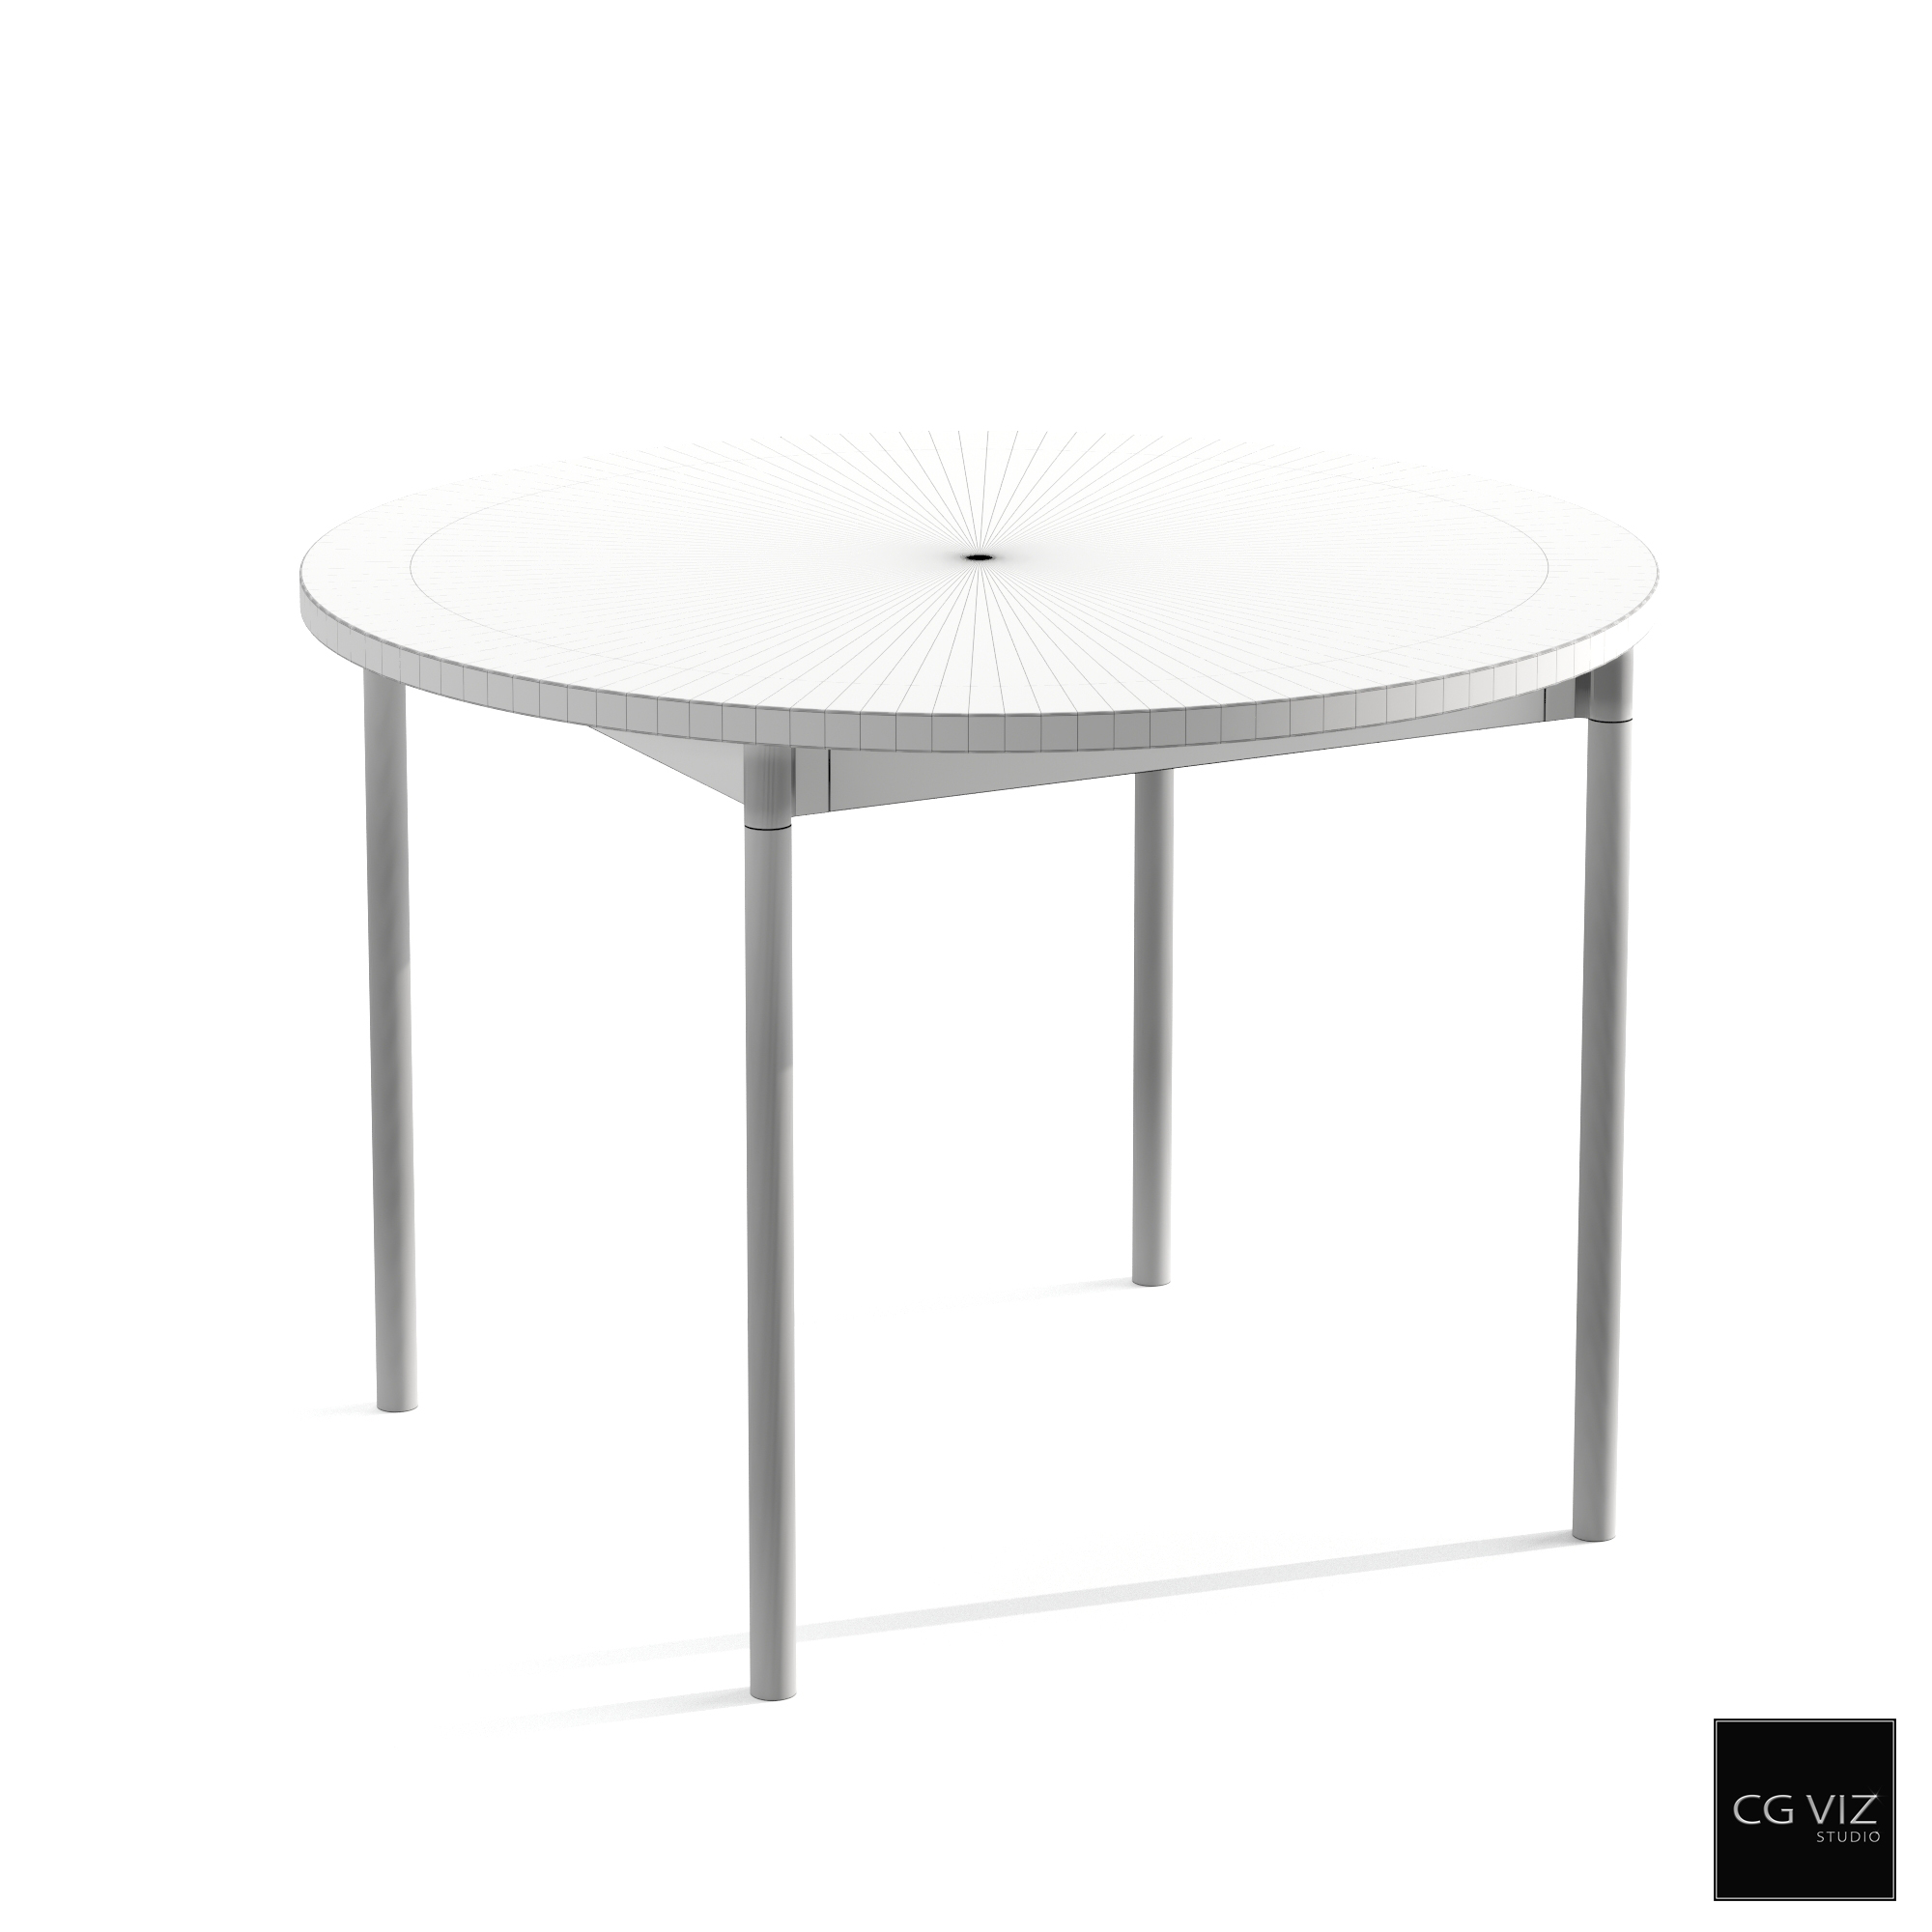 Wireframe View of Muuto Base Round Table 3D Model